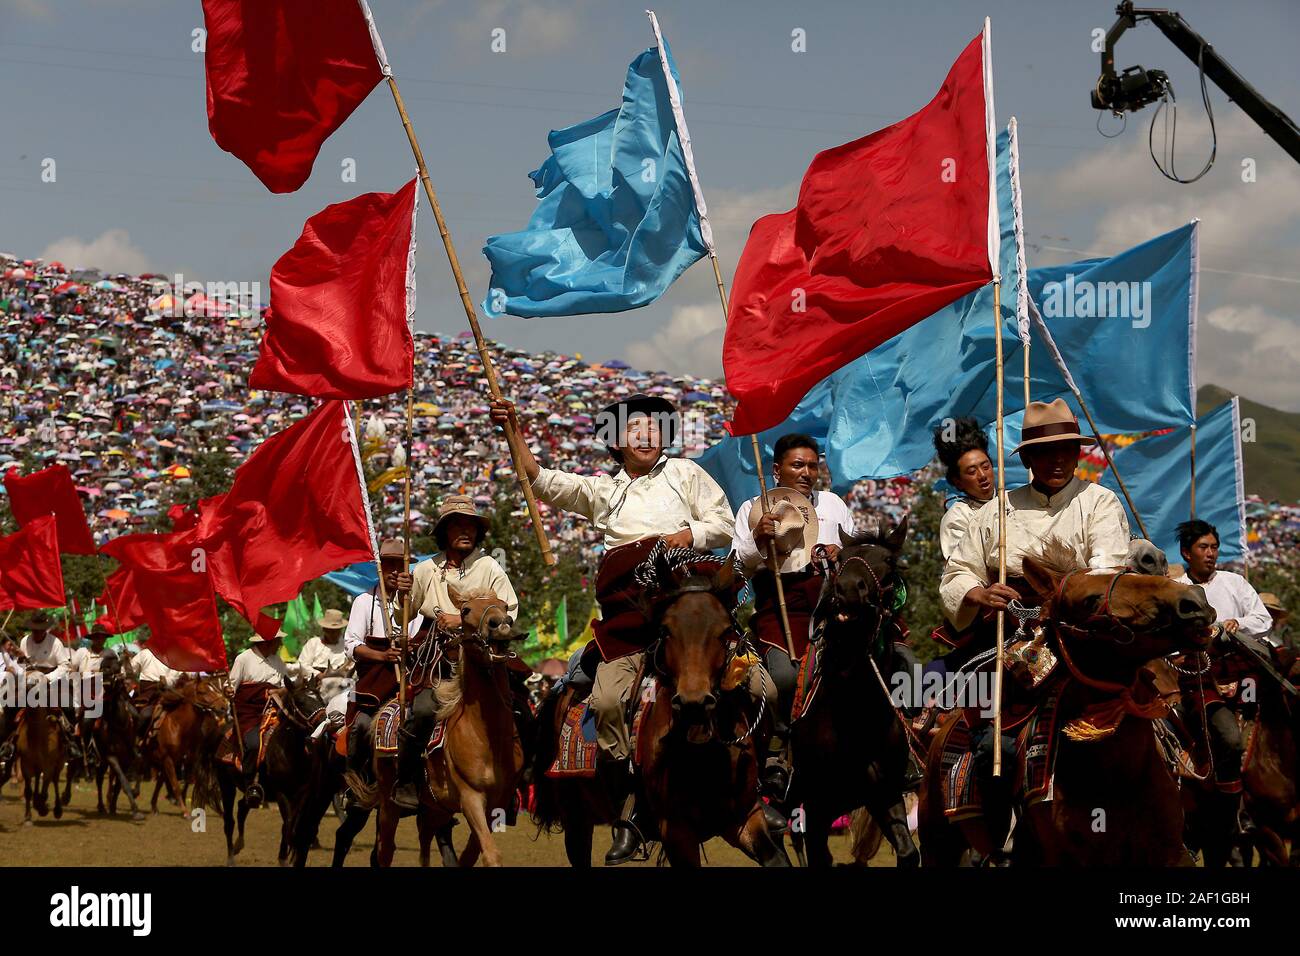 Gannan, China. 12th Dec, 2019. Mounted Tibetans open the year's biggest event, a regional ethnic minority performance, which celebrates the opening of the Dunhuang Silk Road International Tourism Festival being held in Gannan, a major city in Gansu Province's Tibetan Autonomous Region, on Tuesday, August 30, 2019. The area is a key part of China's massive Belt and Road Initiative, where future development will help alleviate poverty and improve education in the Tibetan region. Photo by Stephen Shaver/UPI Credit: UPI/Alamy Live News Stock Photo